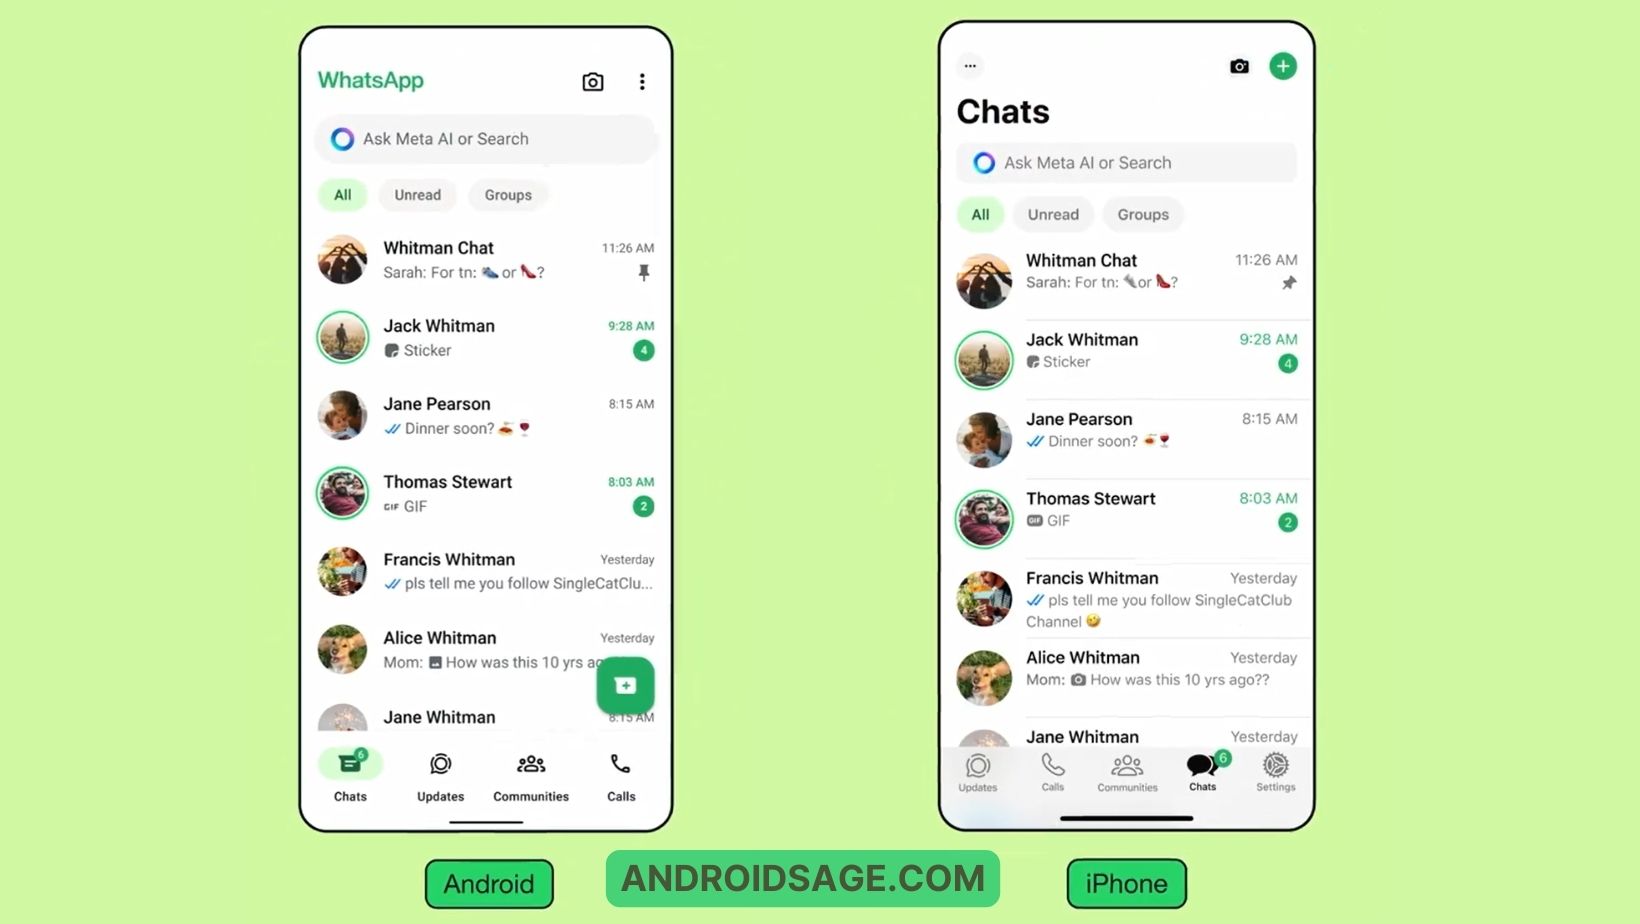 Download WhatsApp APK with New Design and Meta AI for Android and iPhone